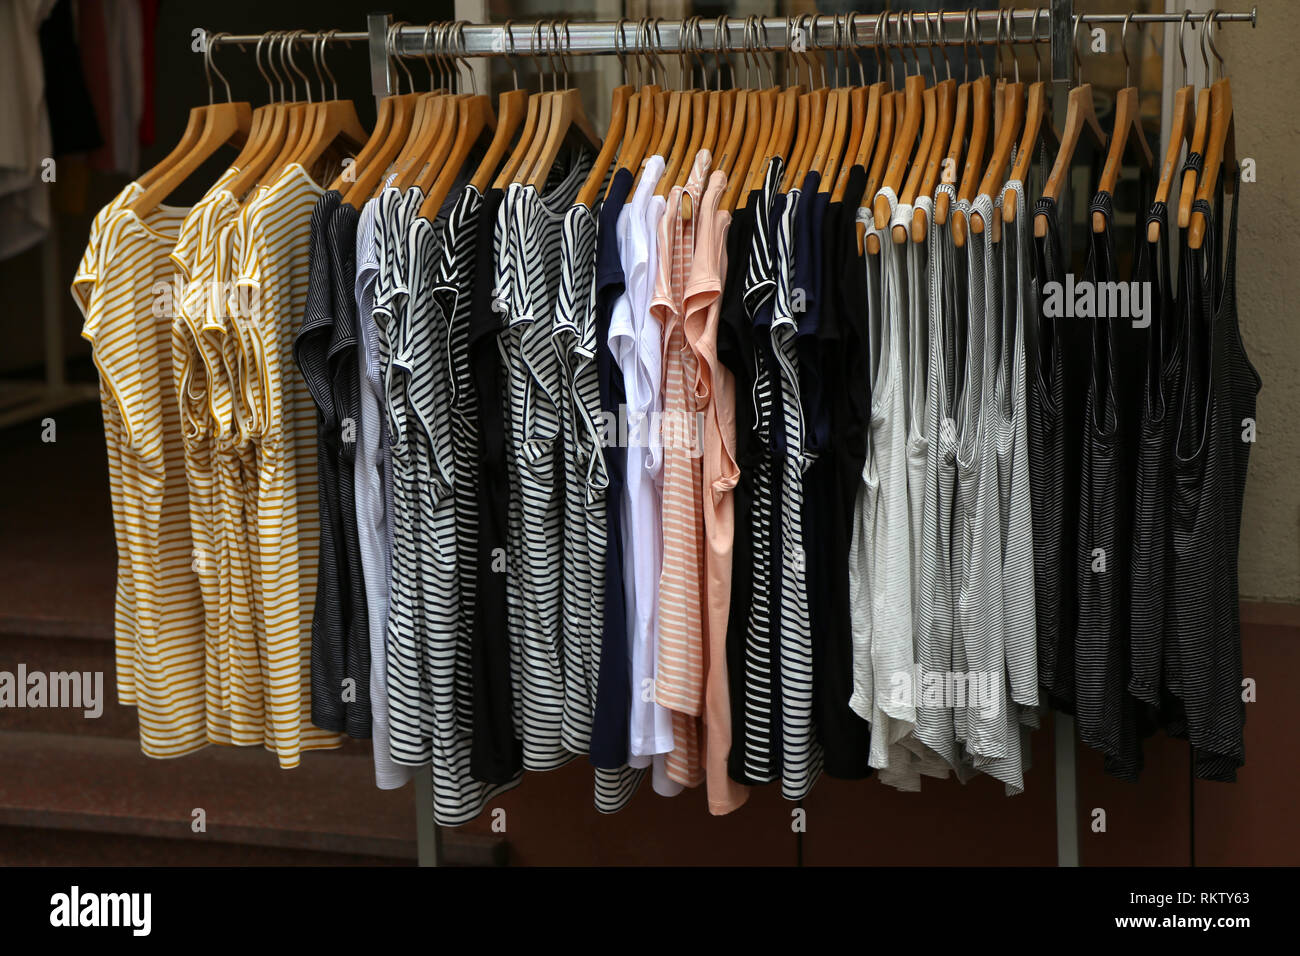 Clothing / Clothing for sale in the store Stock Photo